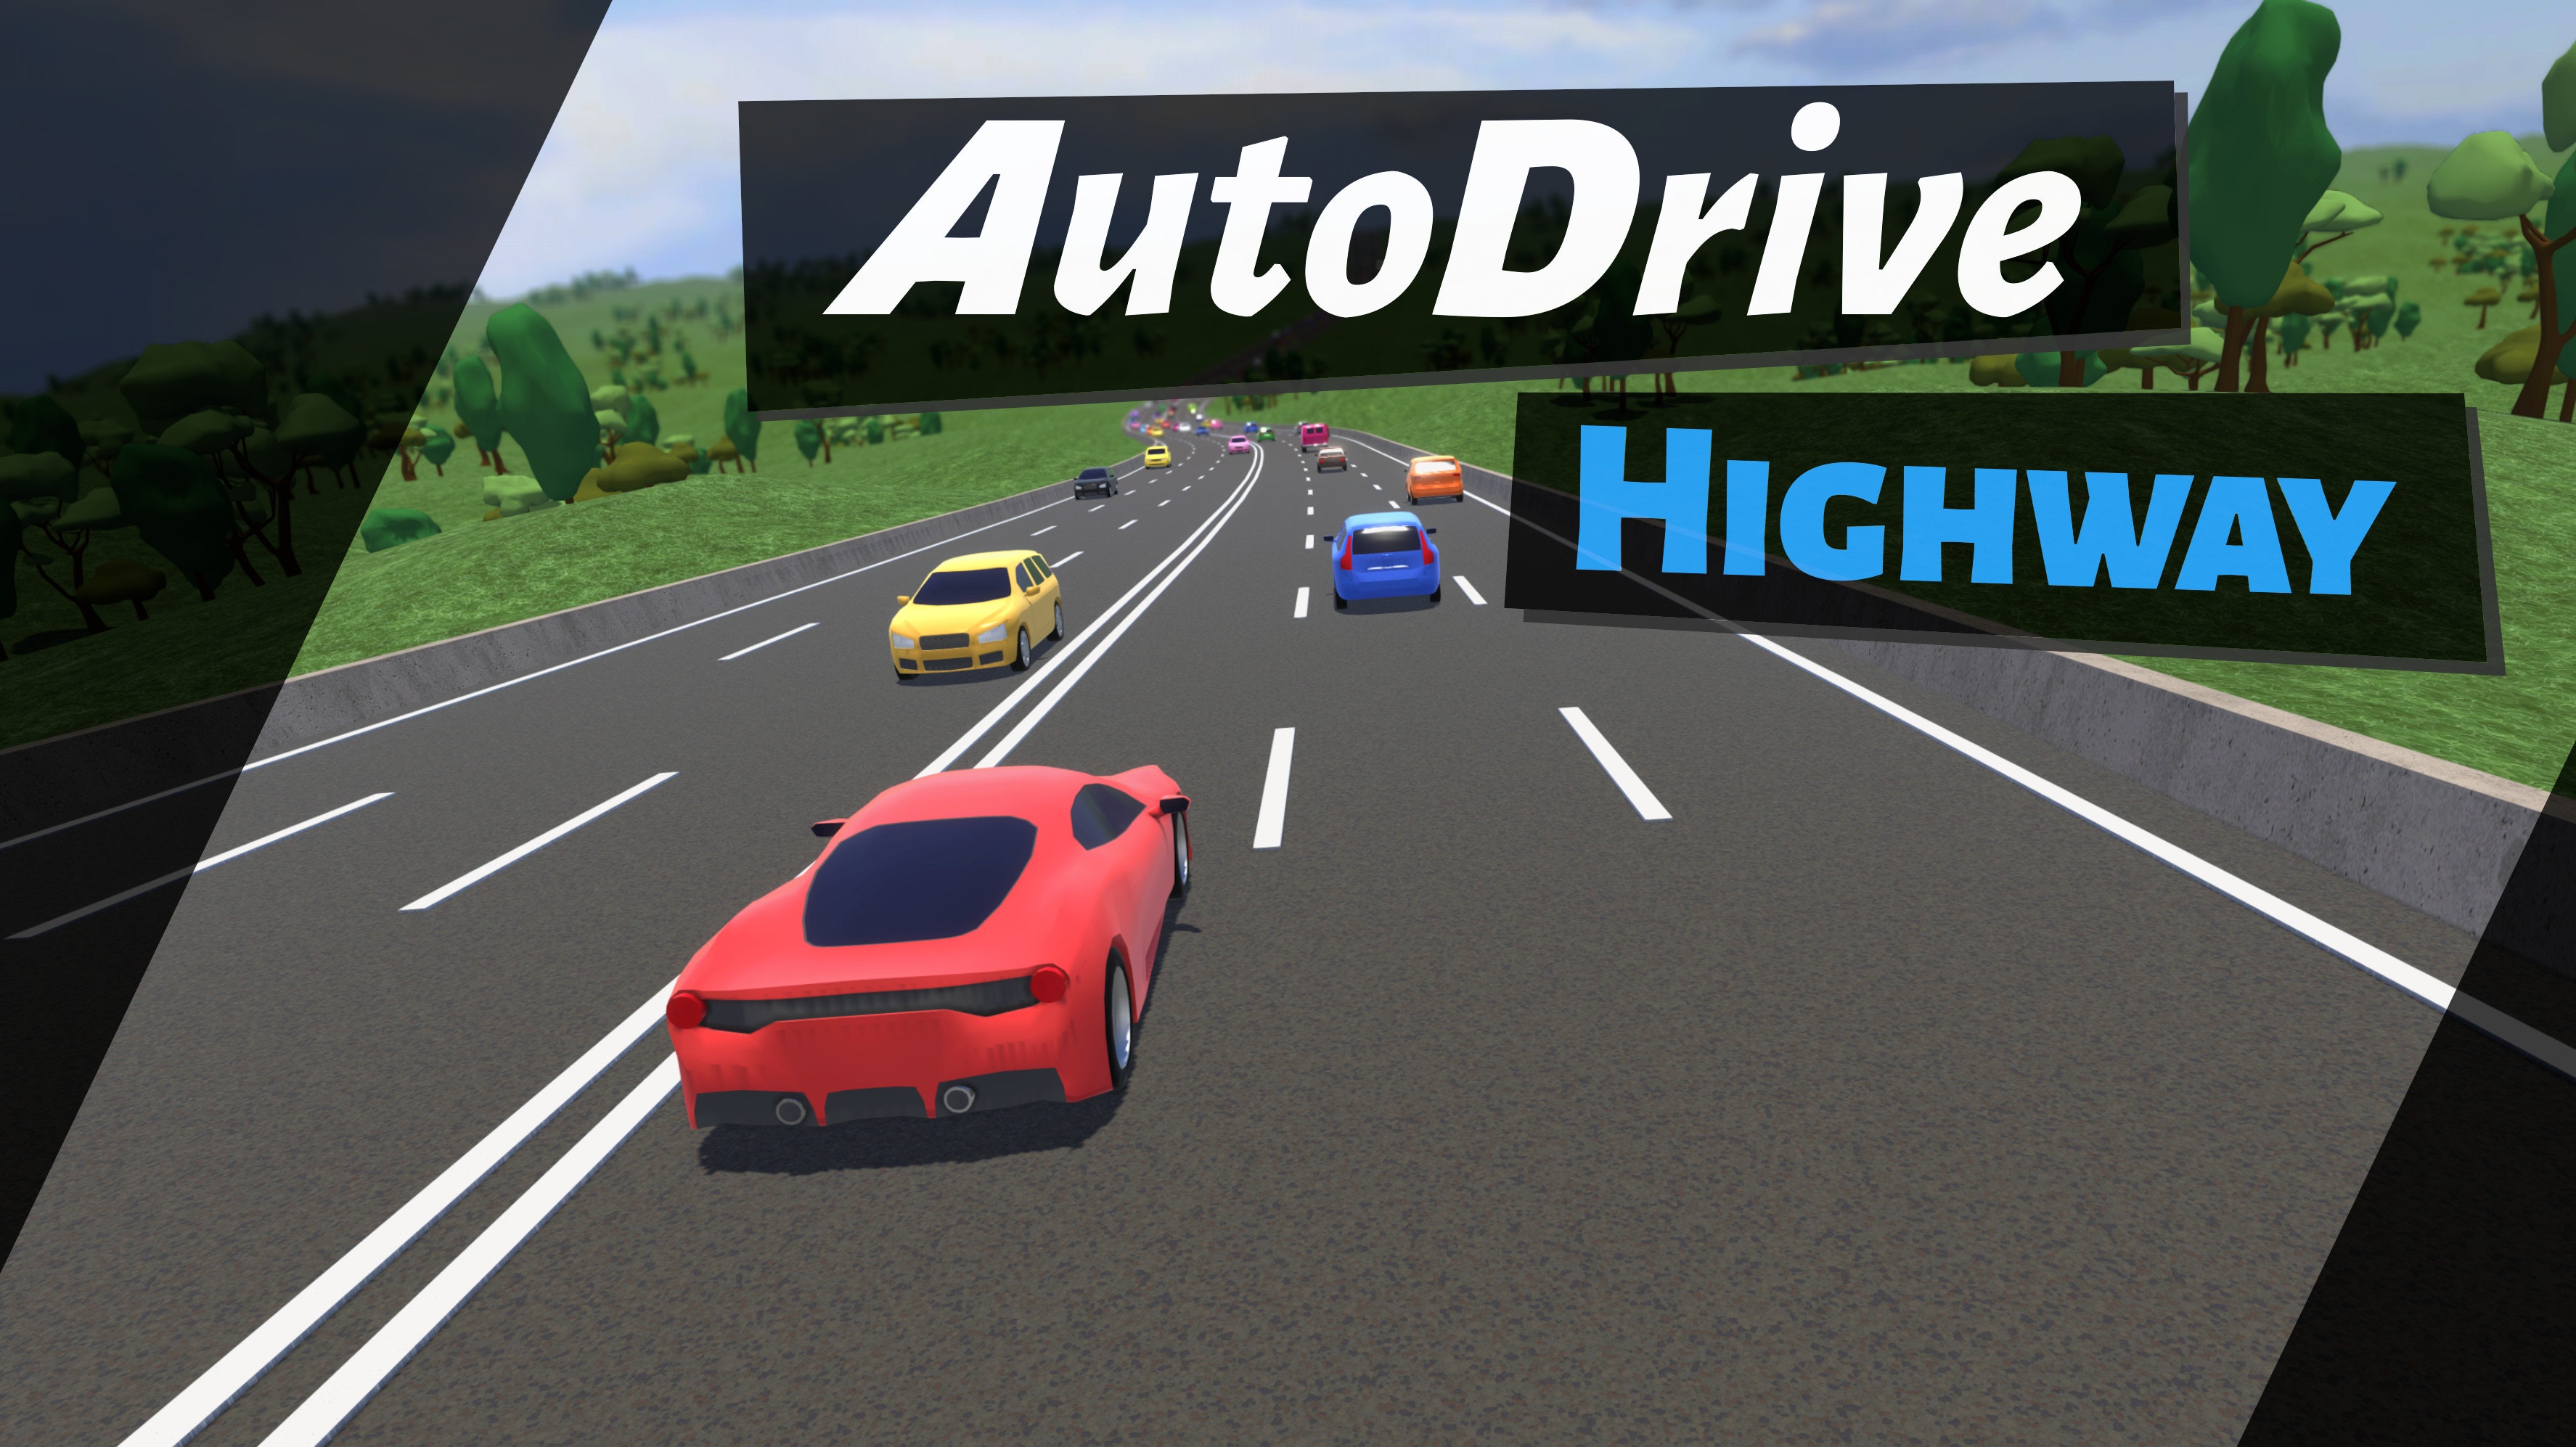 Play Traffic Driving Car Simulator Online for Free on PC & Mobile